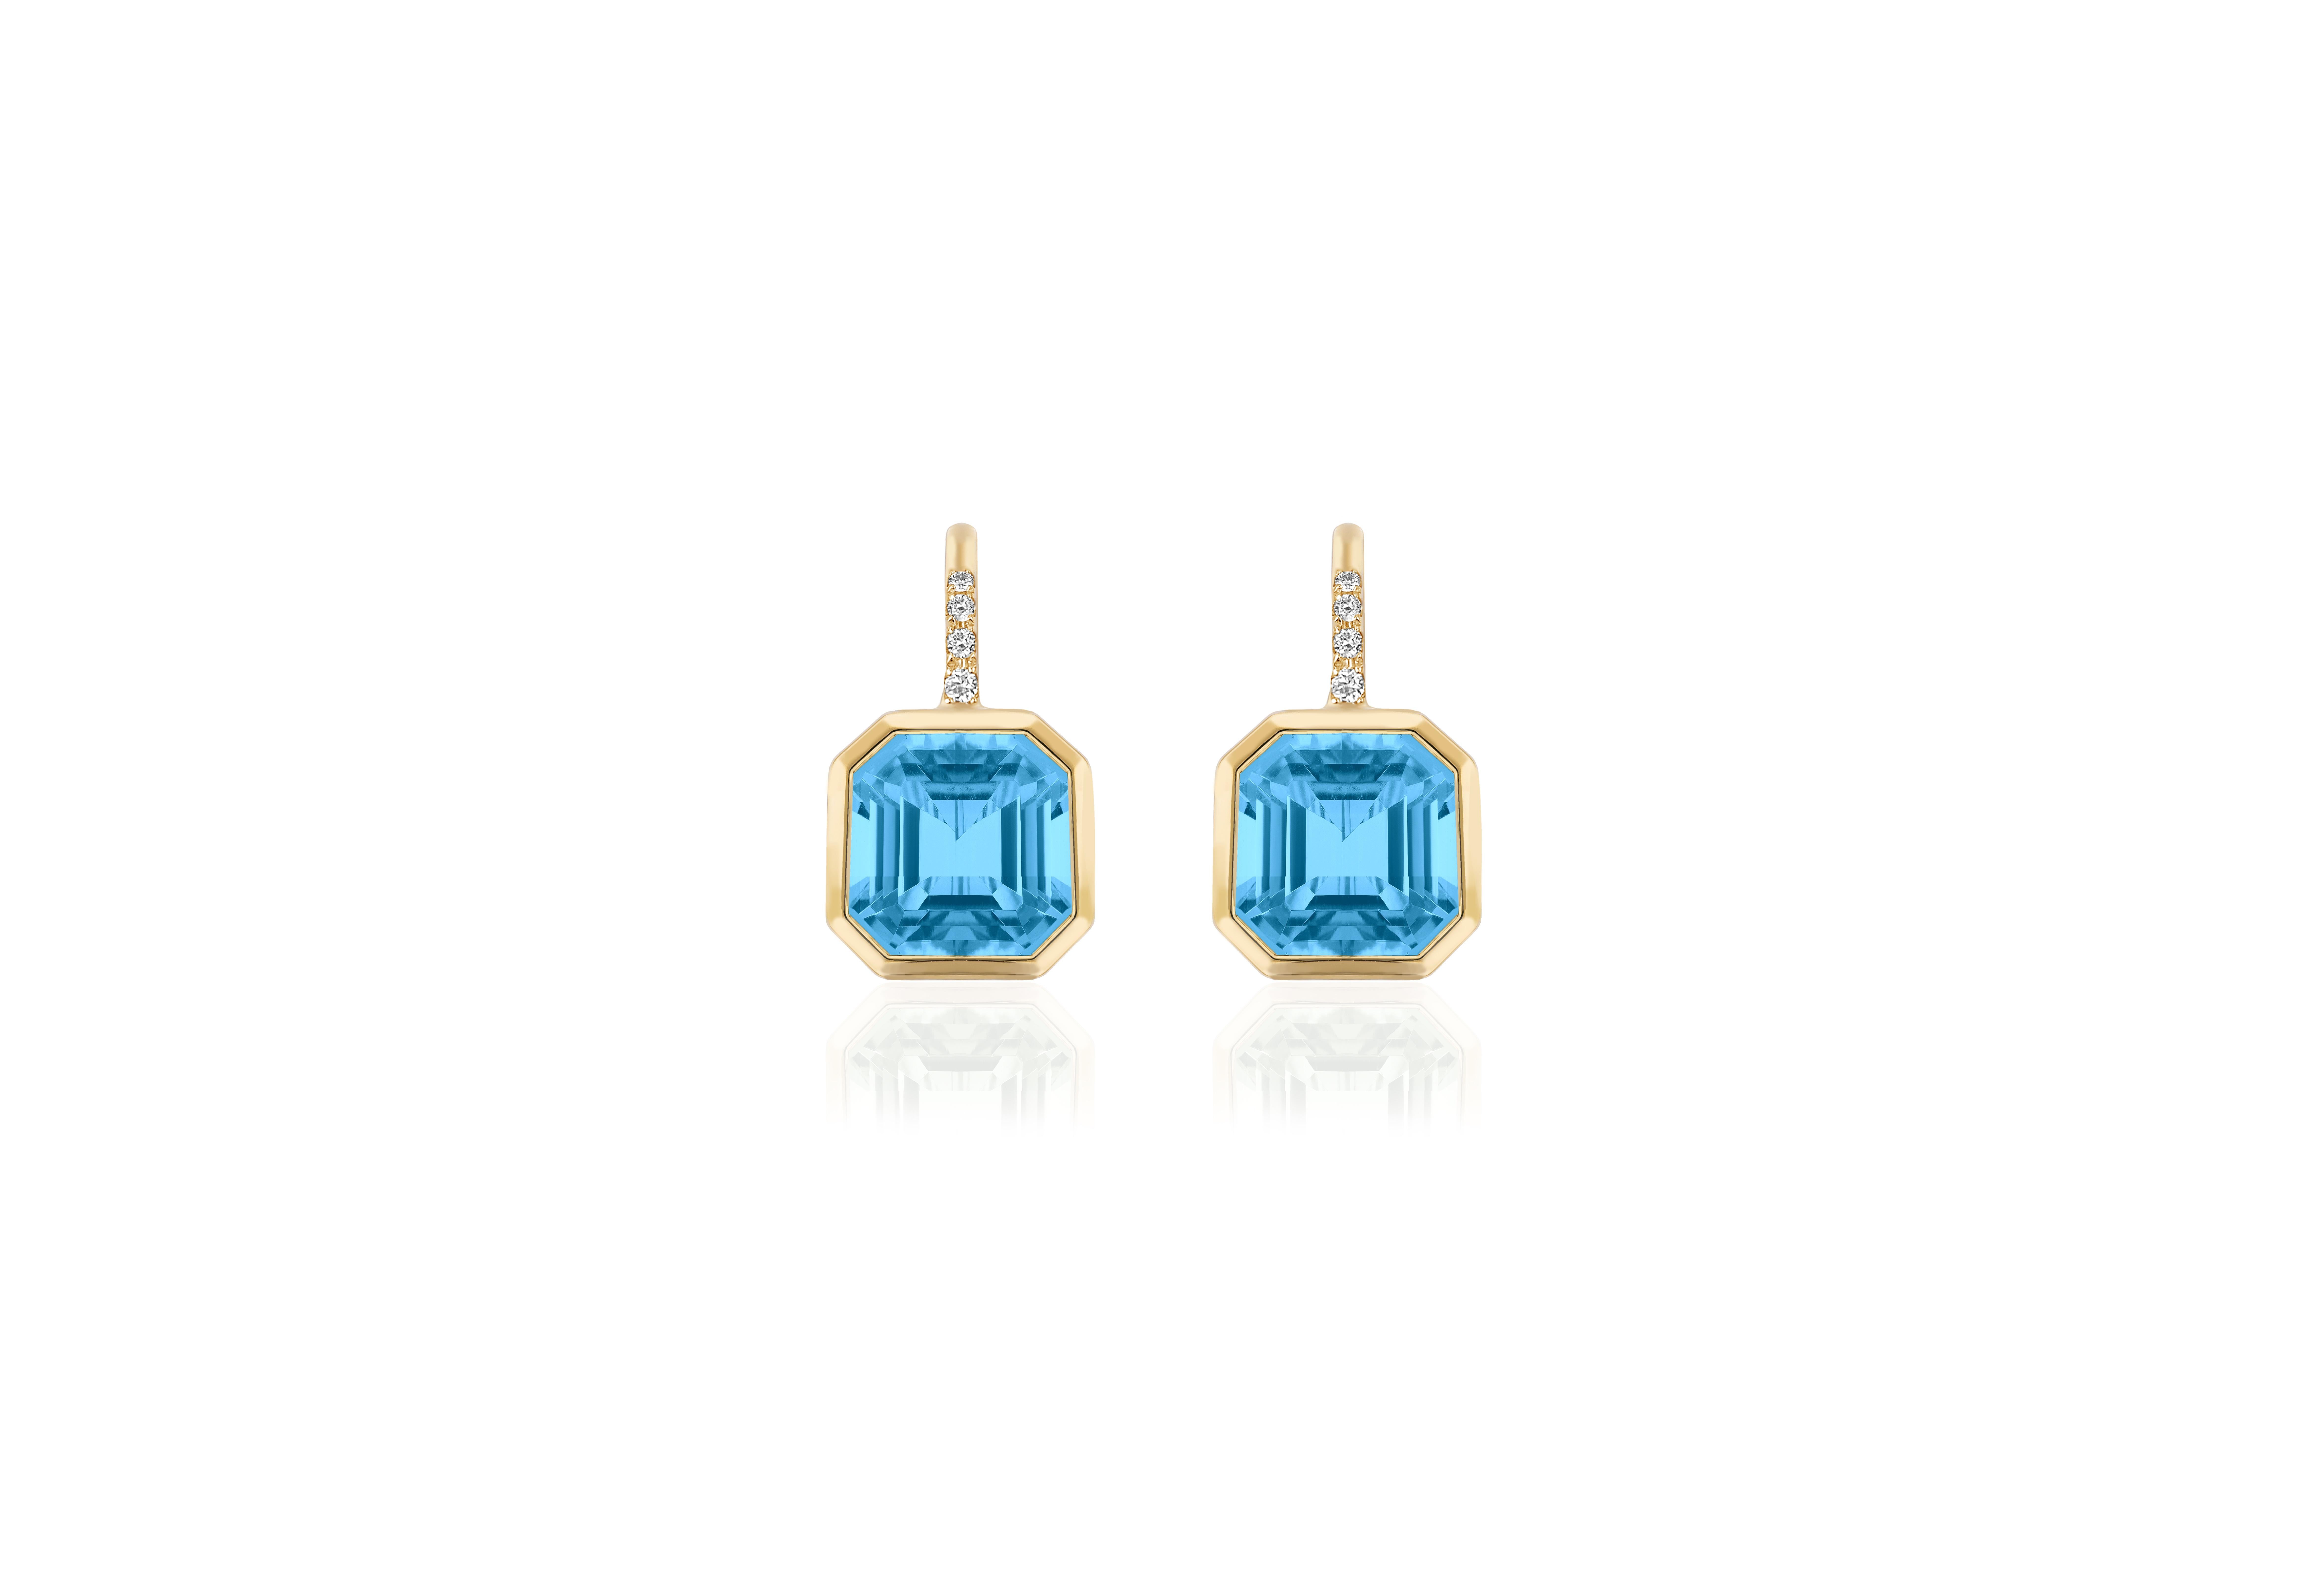 These beautiful earrings in a 9 x 9 mm Asscher cut, which is a  blend of the princess and emerald cuts with X-shaped facets from its corners to its center culet, are made in Blue Topaz which is from the Topaz family. They are set on wire with 4